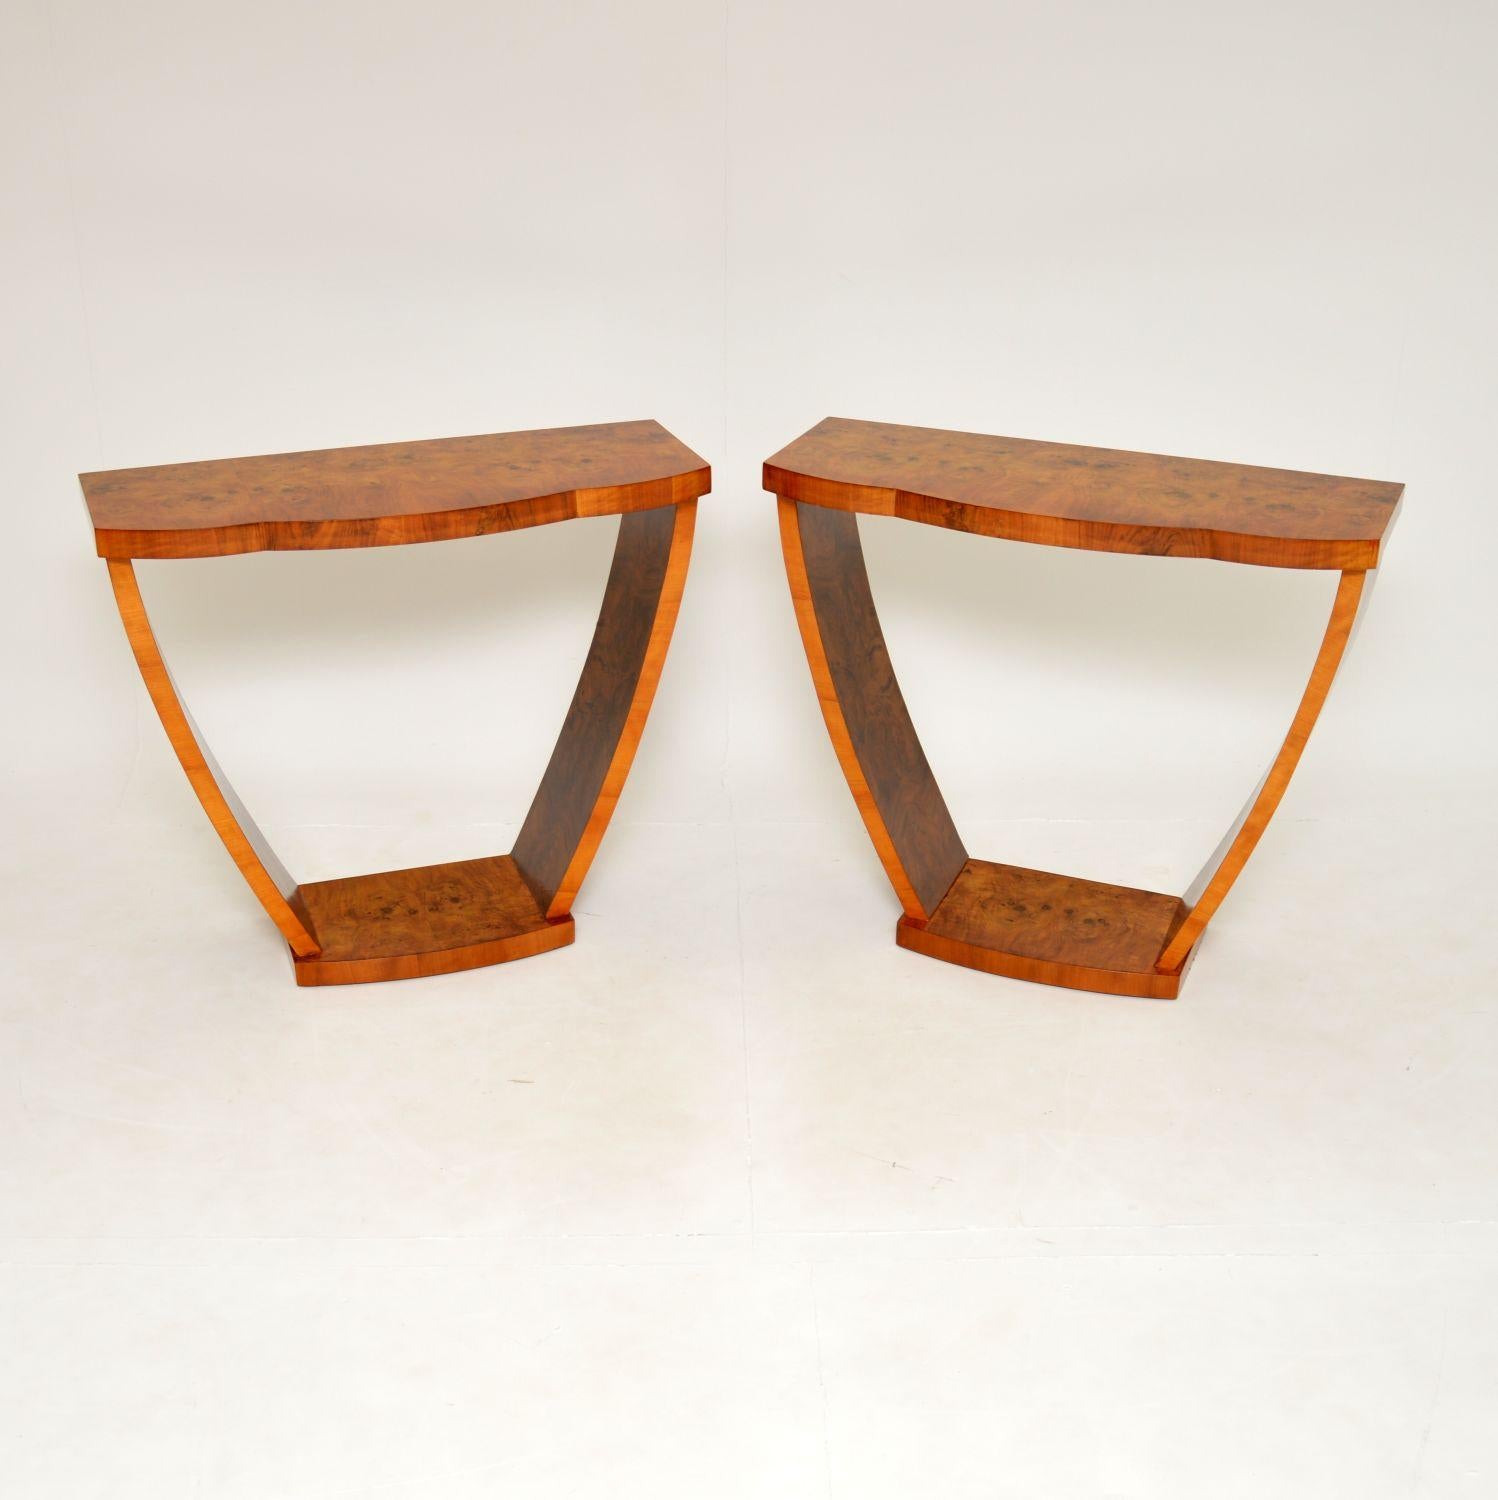 A magnificent and very rare pair of original Art Deco period console tables in burr walnut. These were made in England, they date from around the 1930’s.

The quality is amazing and these are a lovely, useful size. They have an elegant design, not